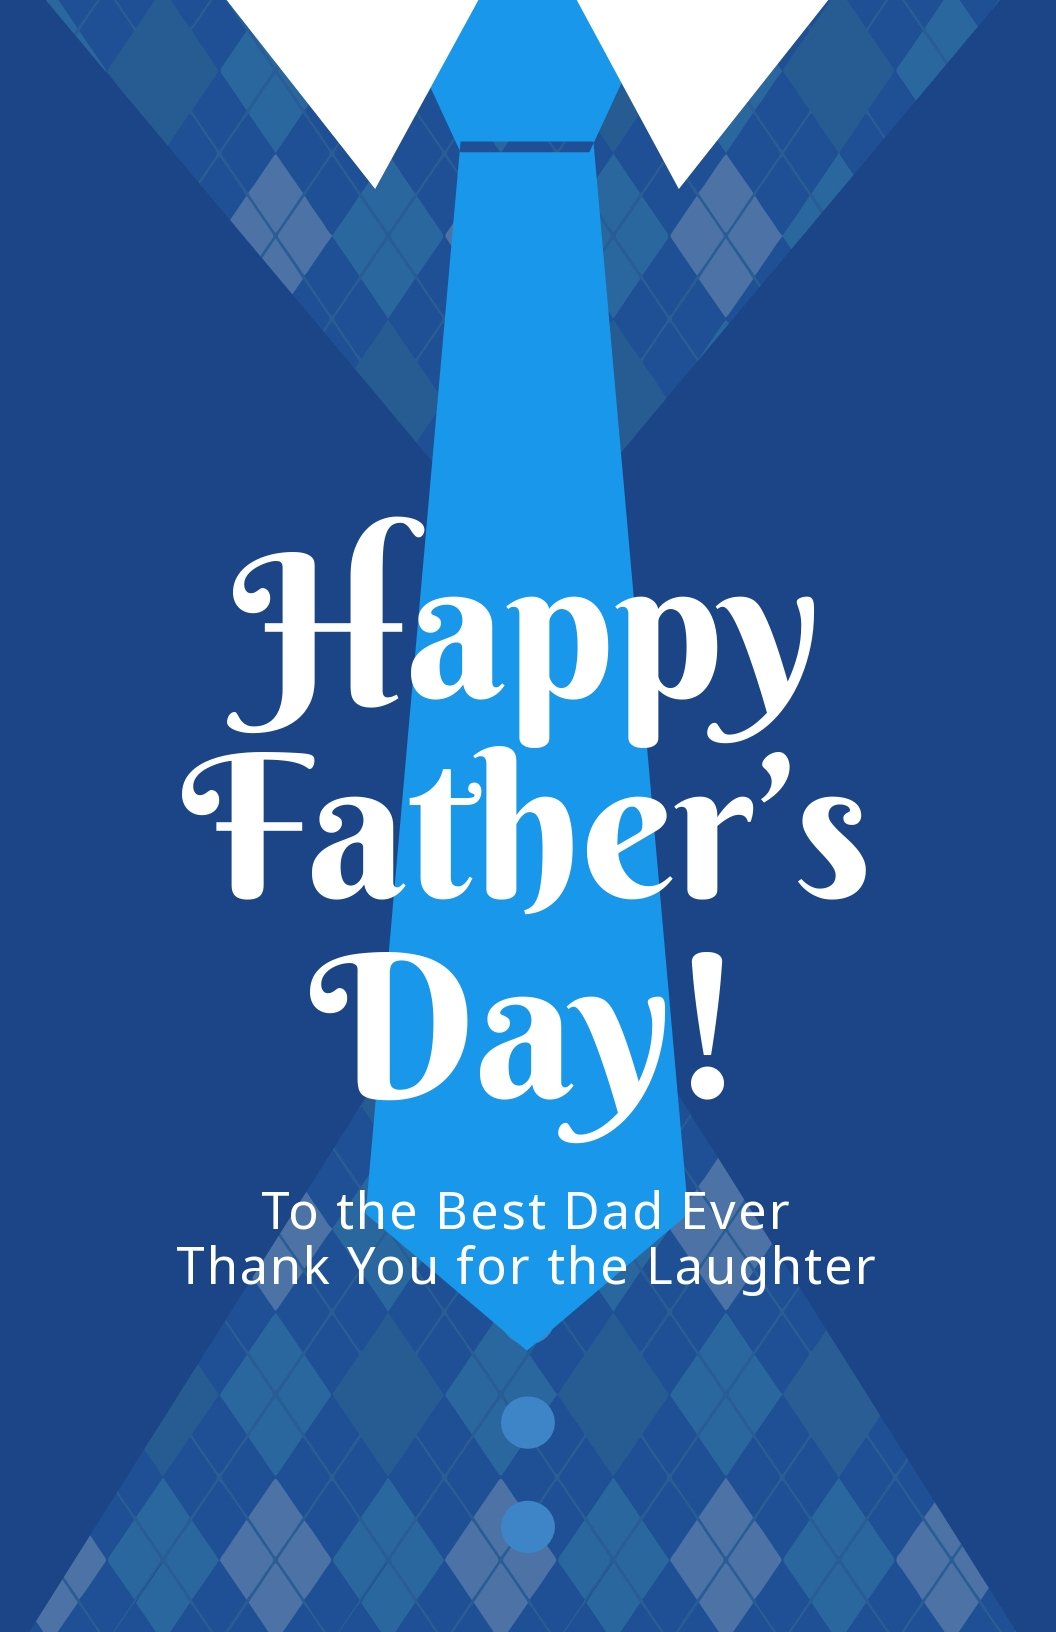 Free Creative Father's Day Poster Template - Google Docs, Word ...